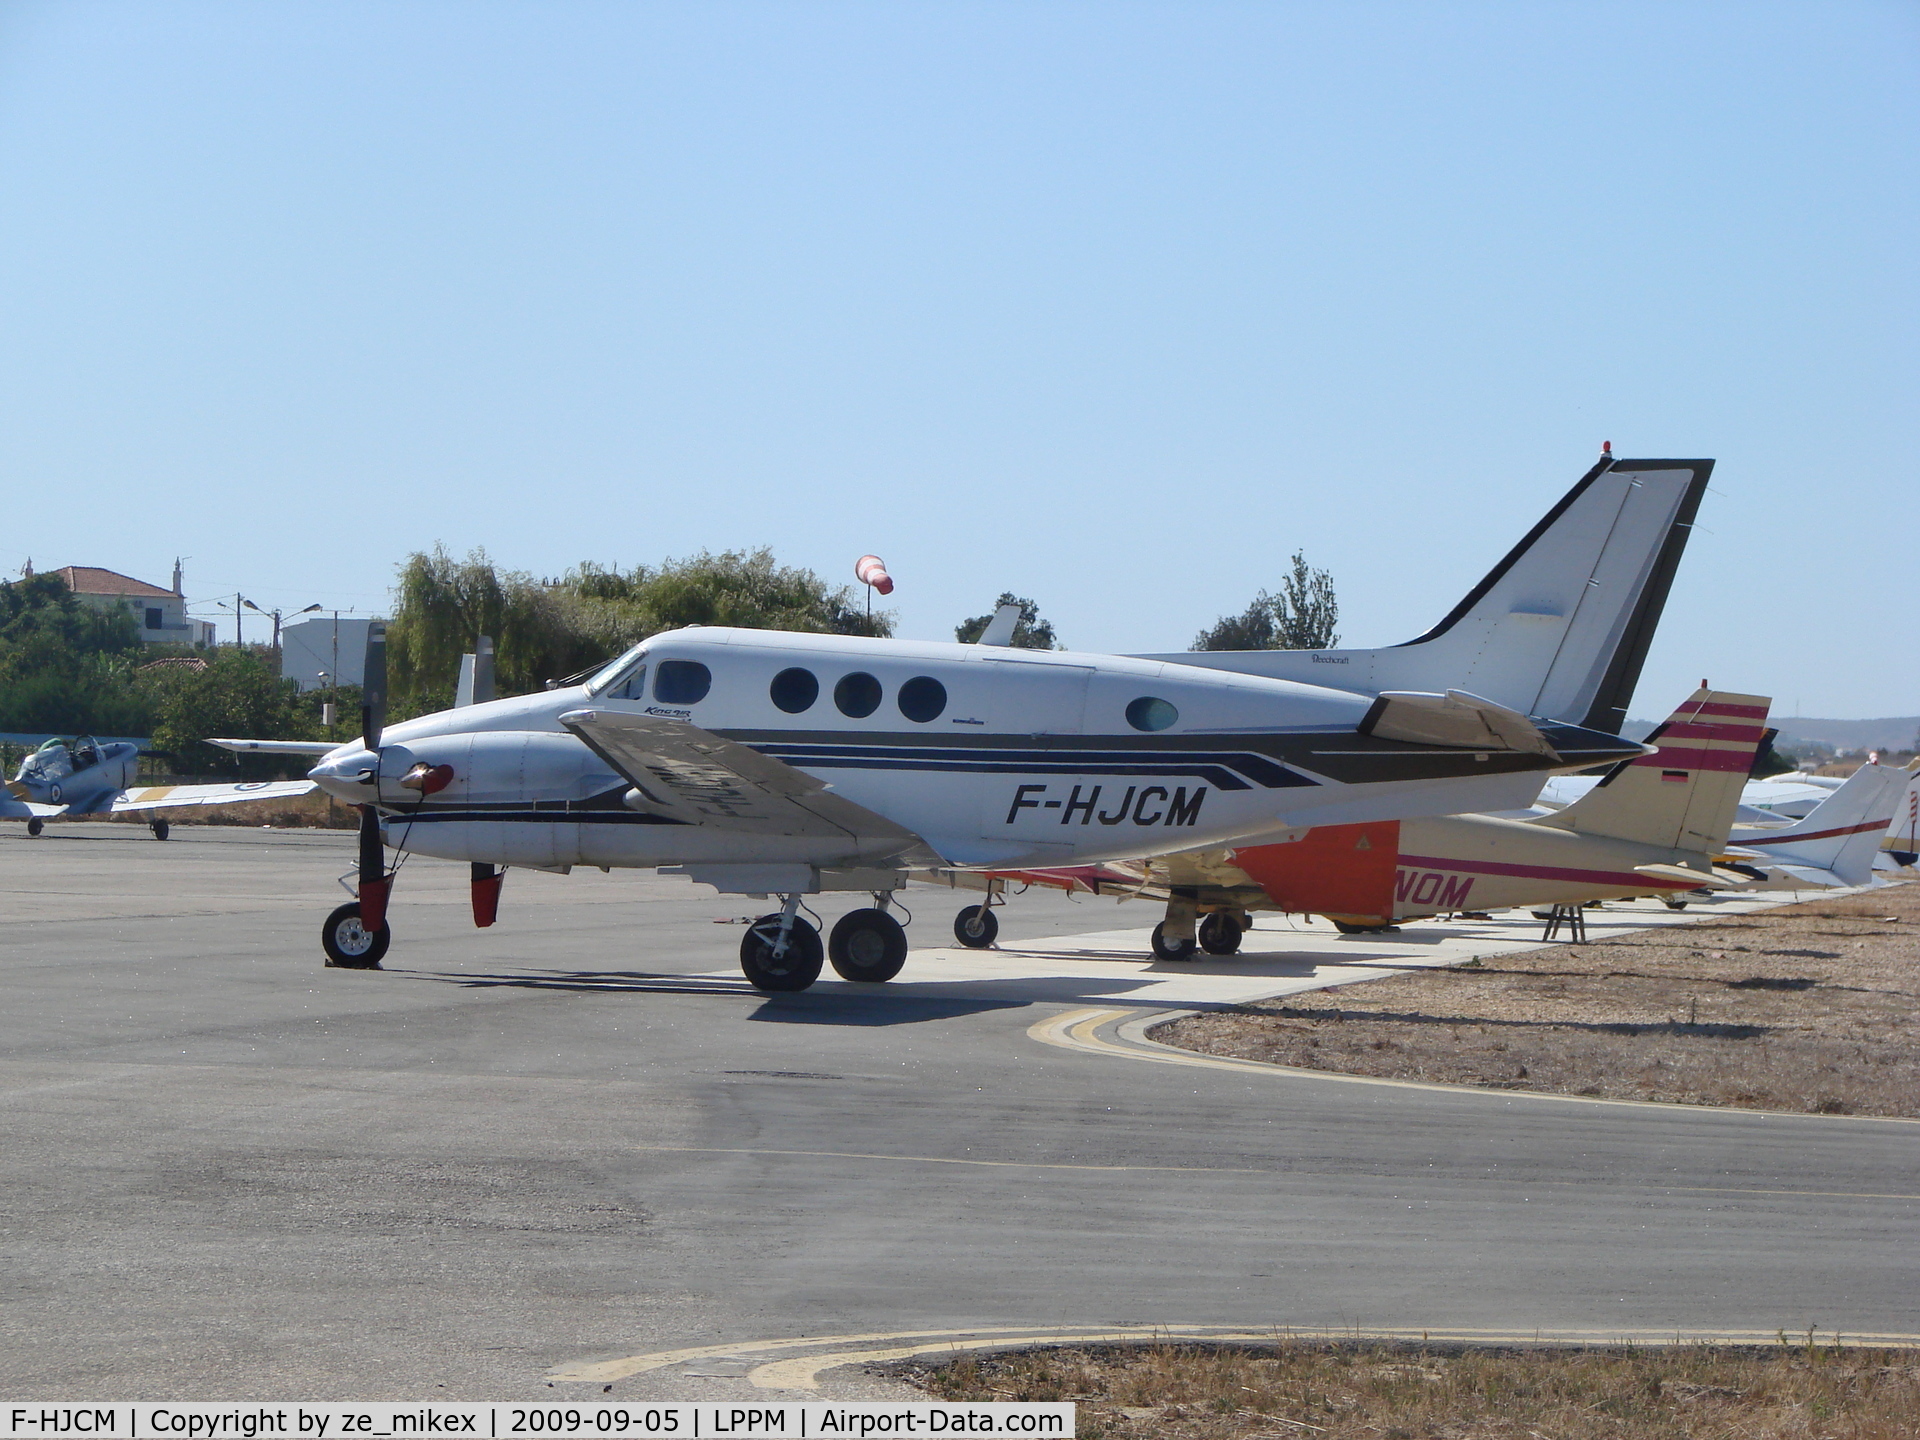 F-HJCM, 1984 Beech C90A King Air C/N LJ-1098, Parked at portimao